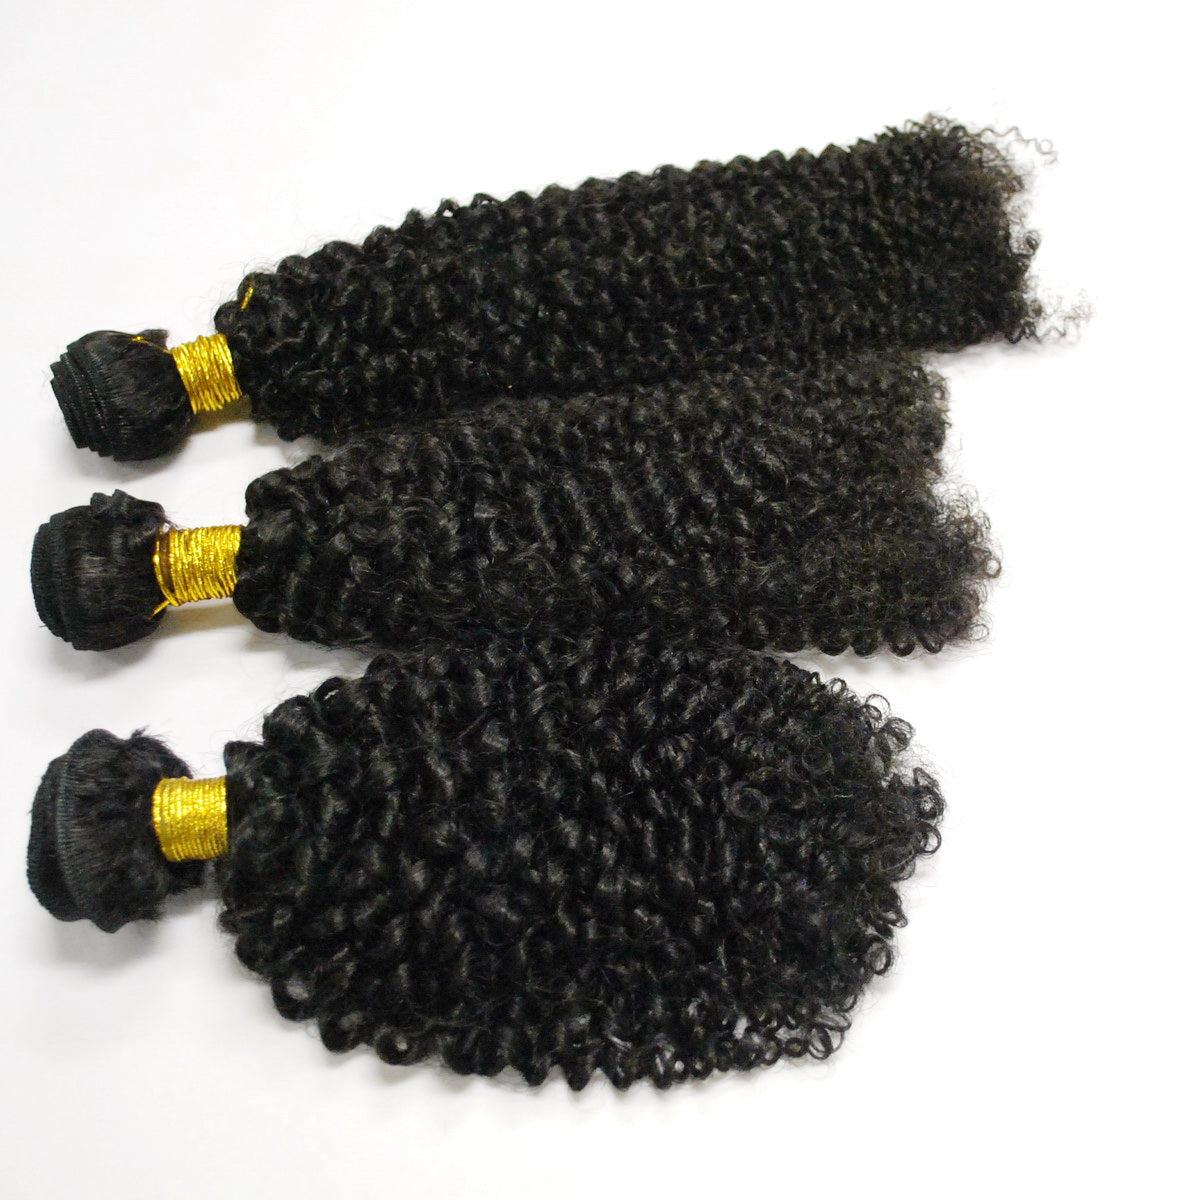 Afro kinky curly bundles 100% human hair for black women 50g/pc hair extensions